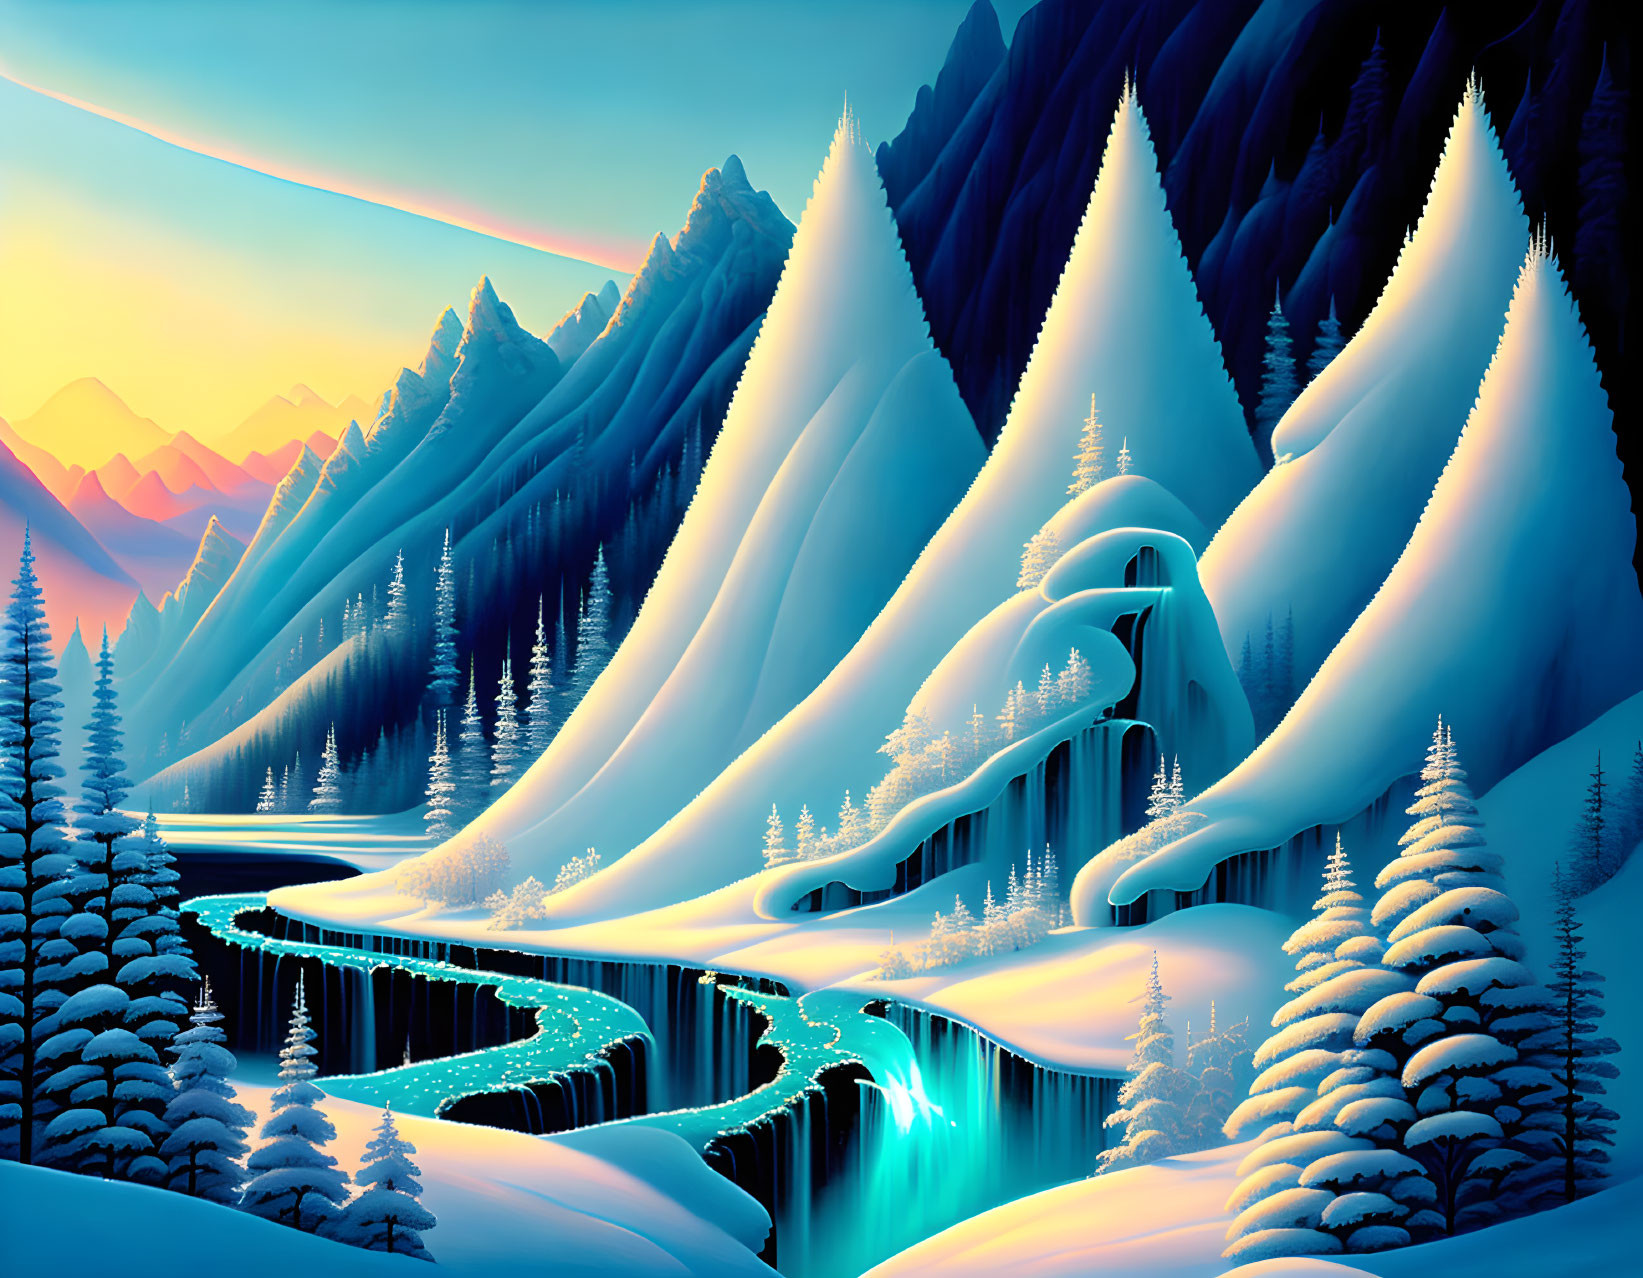 Digital artwork: Snowy mountain landscape with river, waterfall, pine trees, and fantastical structure